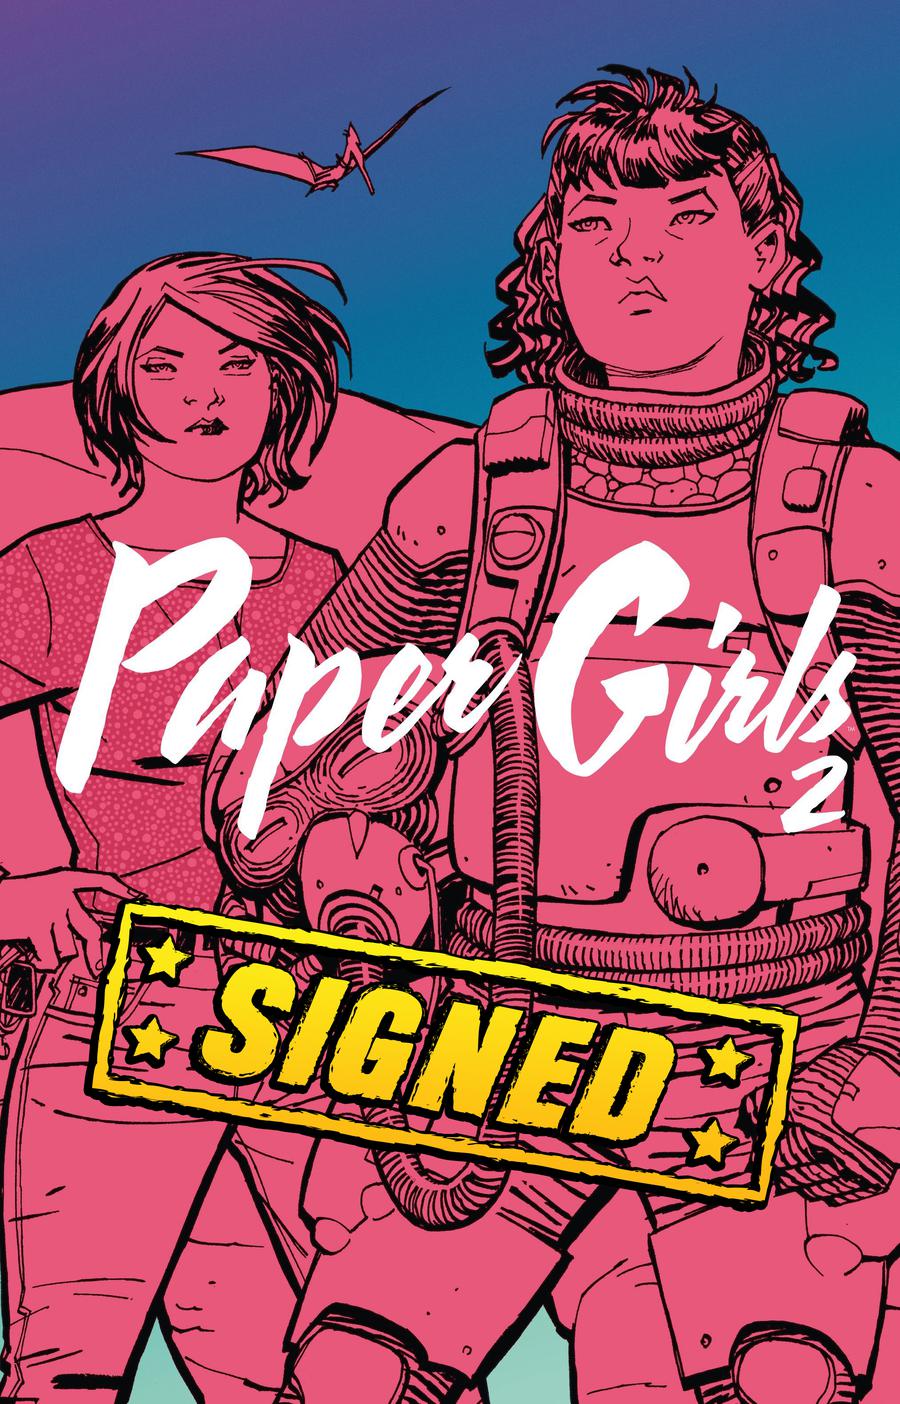 Paper Girls Vol 2 TP Signed By Brian K Vaughan & Cliff Chiang